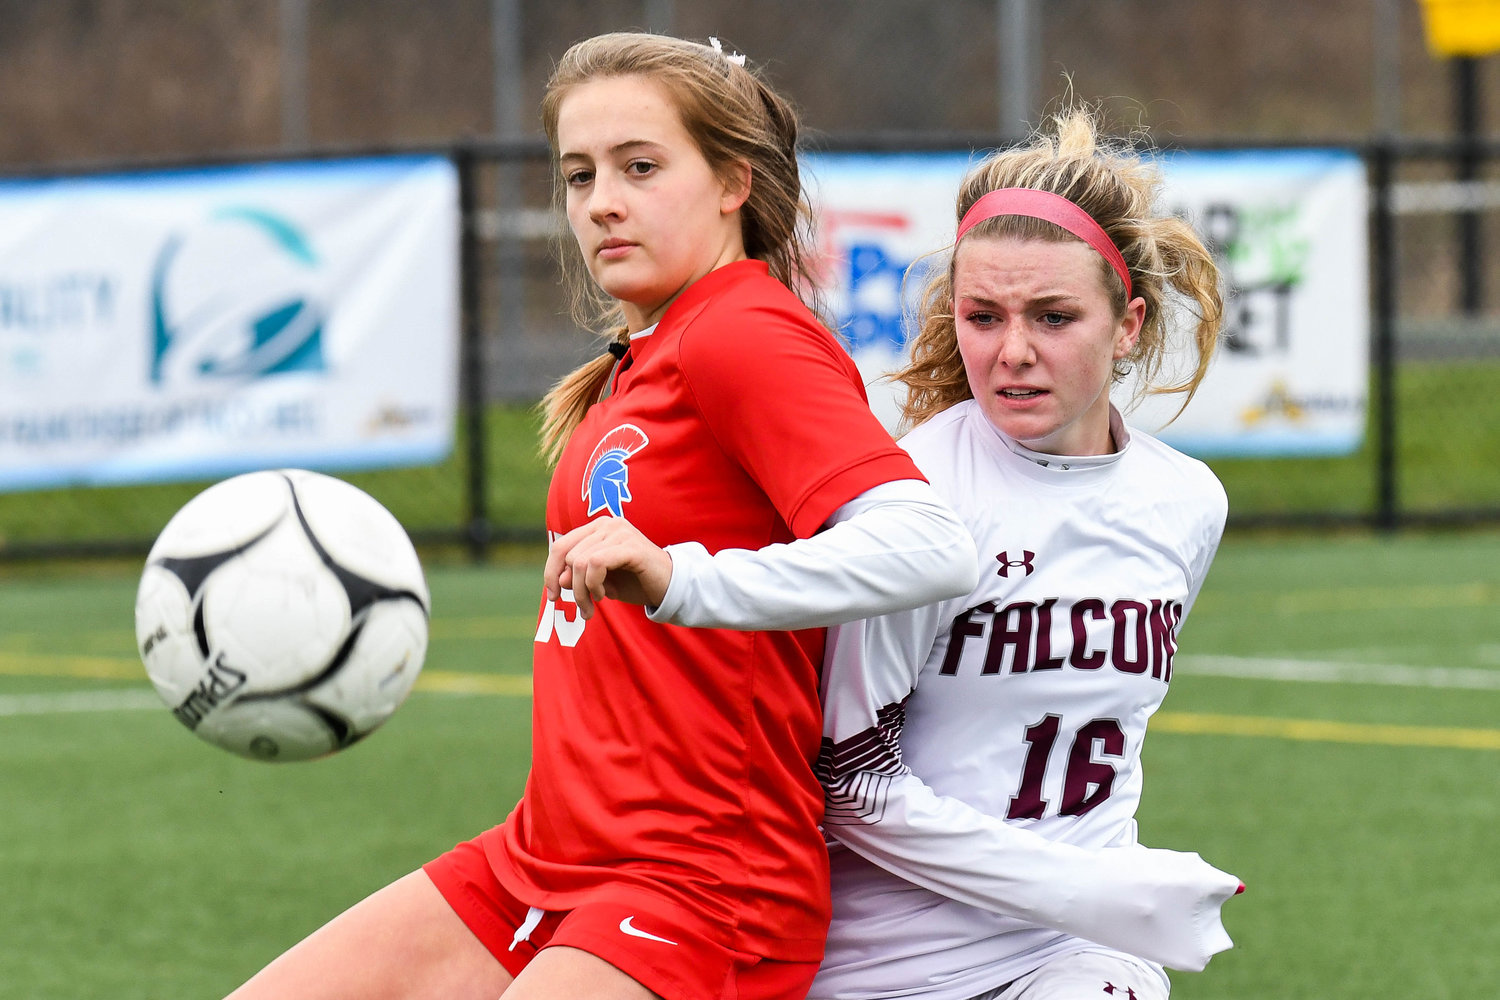 New Hartford’s Anna Rayhill was a key component for the girls soccer team.